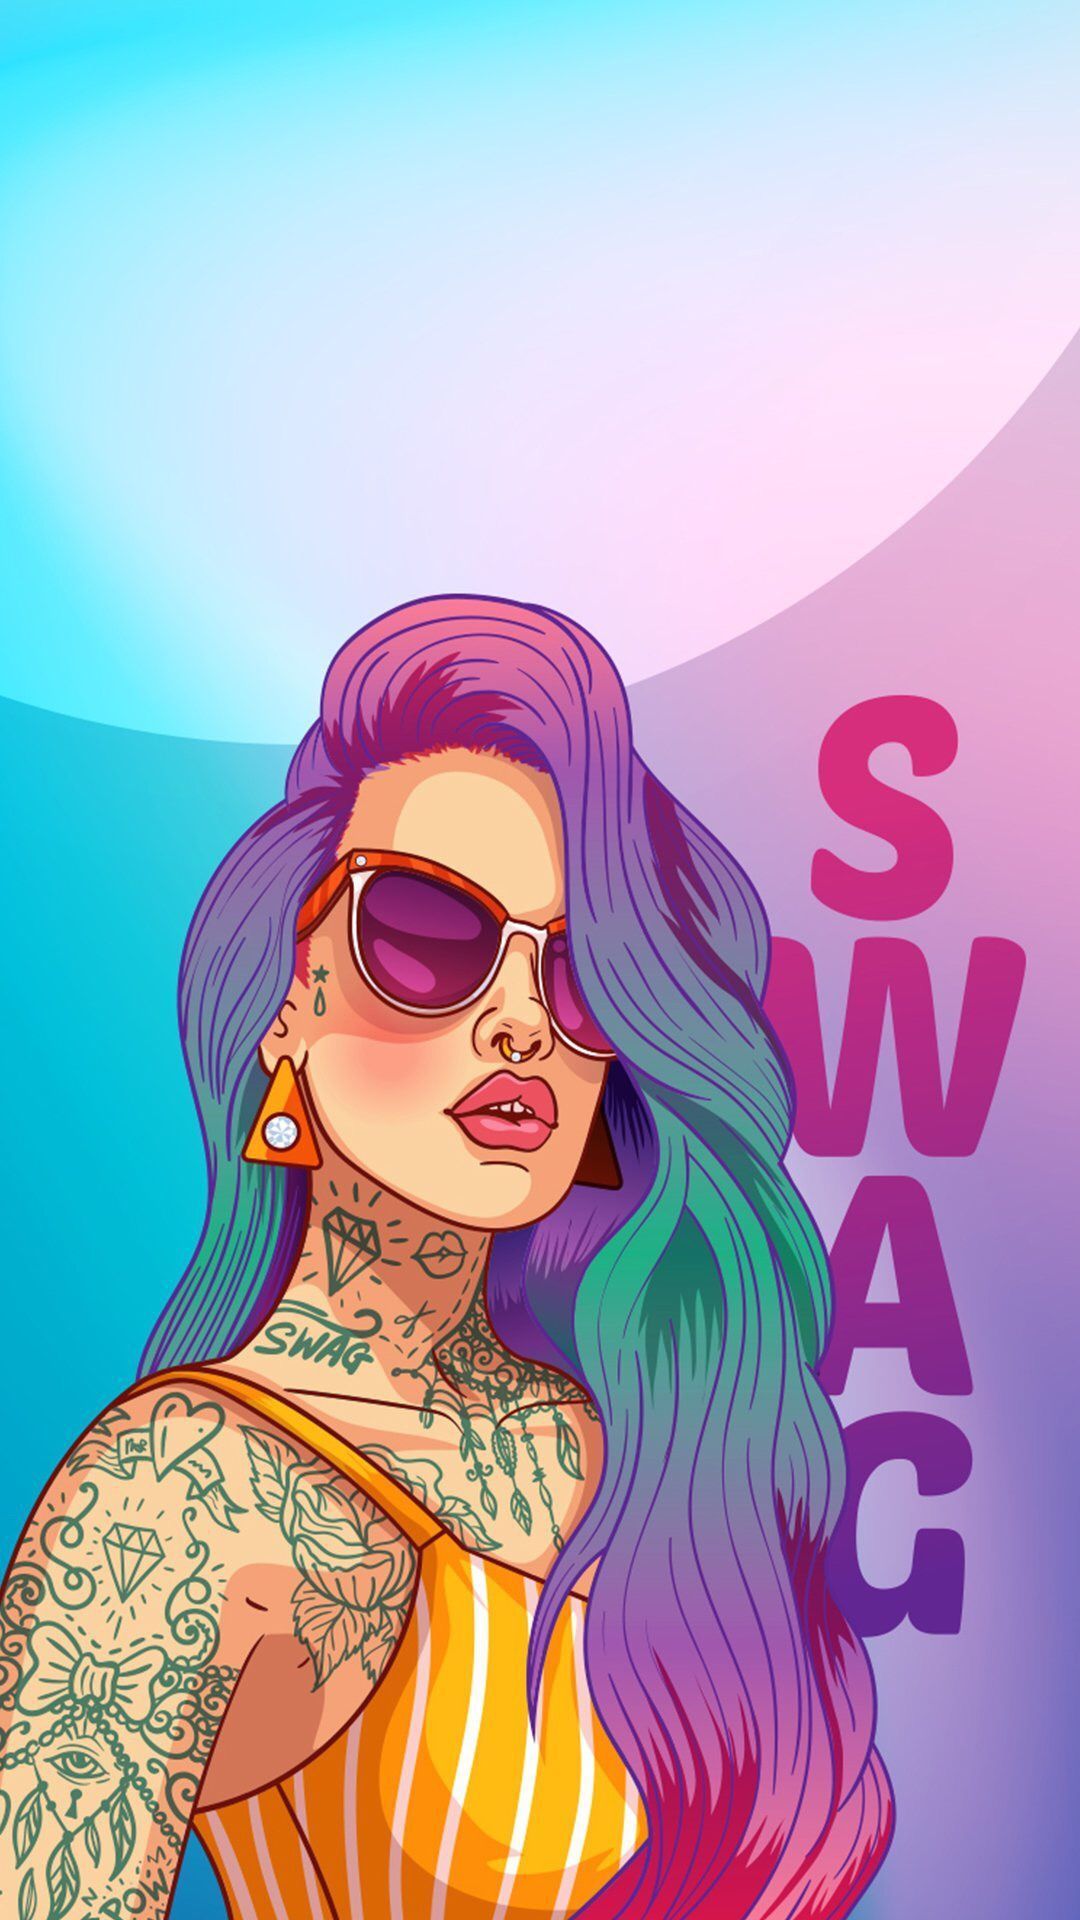 Captivating Girls With Swag Desktop Wallpaper Hd | Background Wallpapers